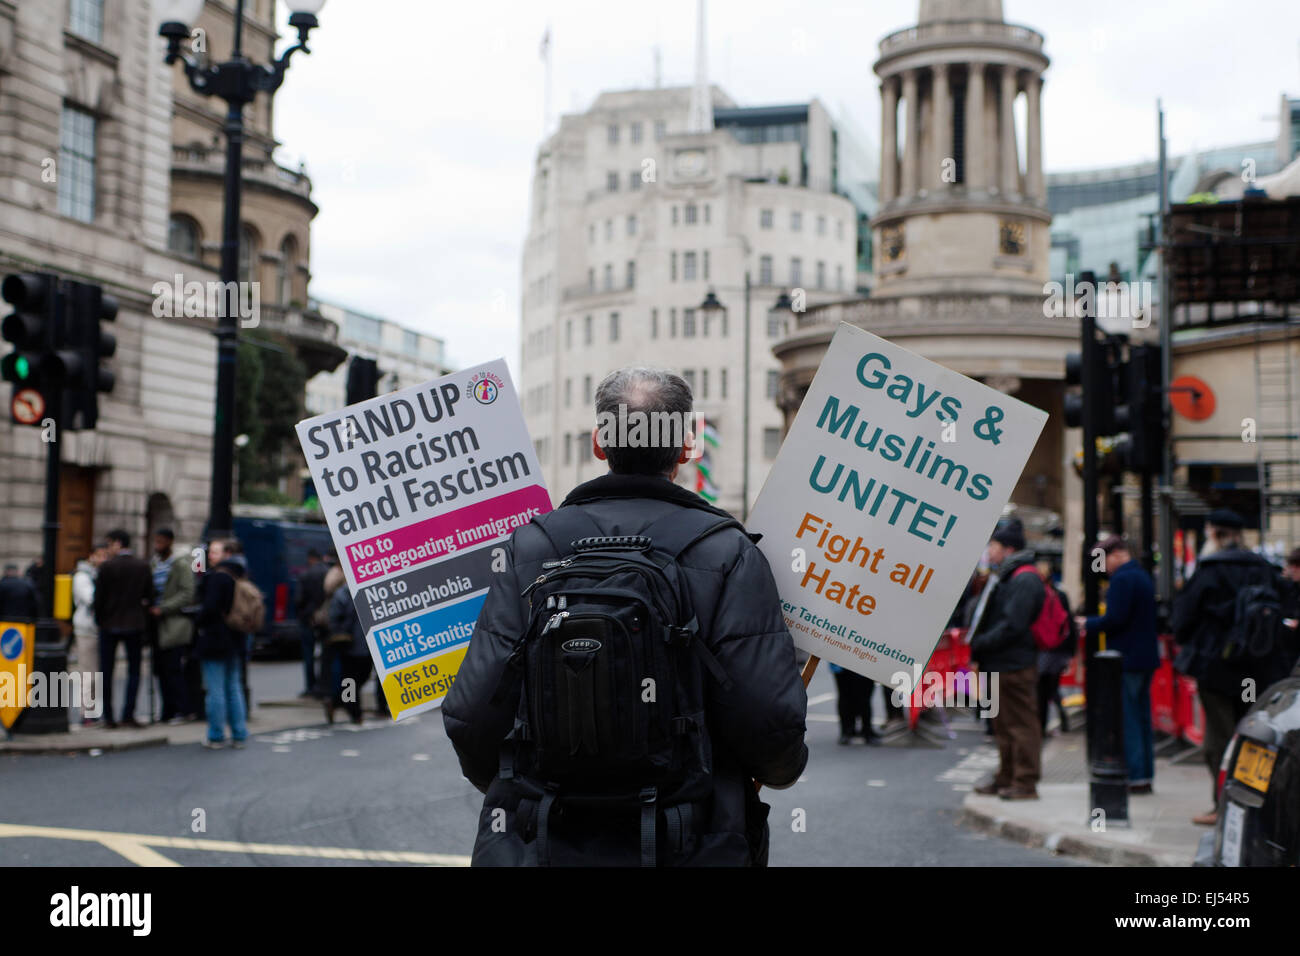 London, UK. 21st March, 2015.   protester standing placard at the Stand up to racism and fascism Protest London,  Credit:  Peter Barbe/Alamy Live News Stock Photo